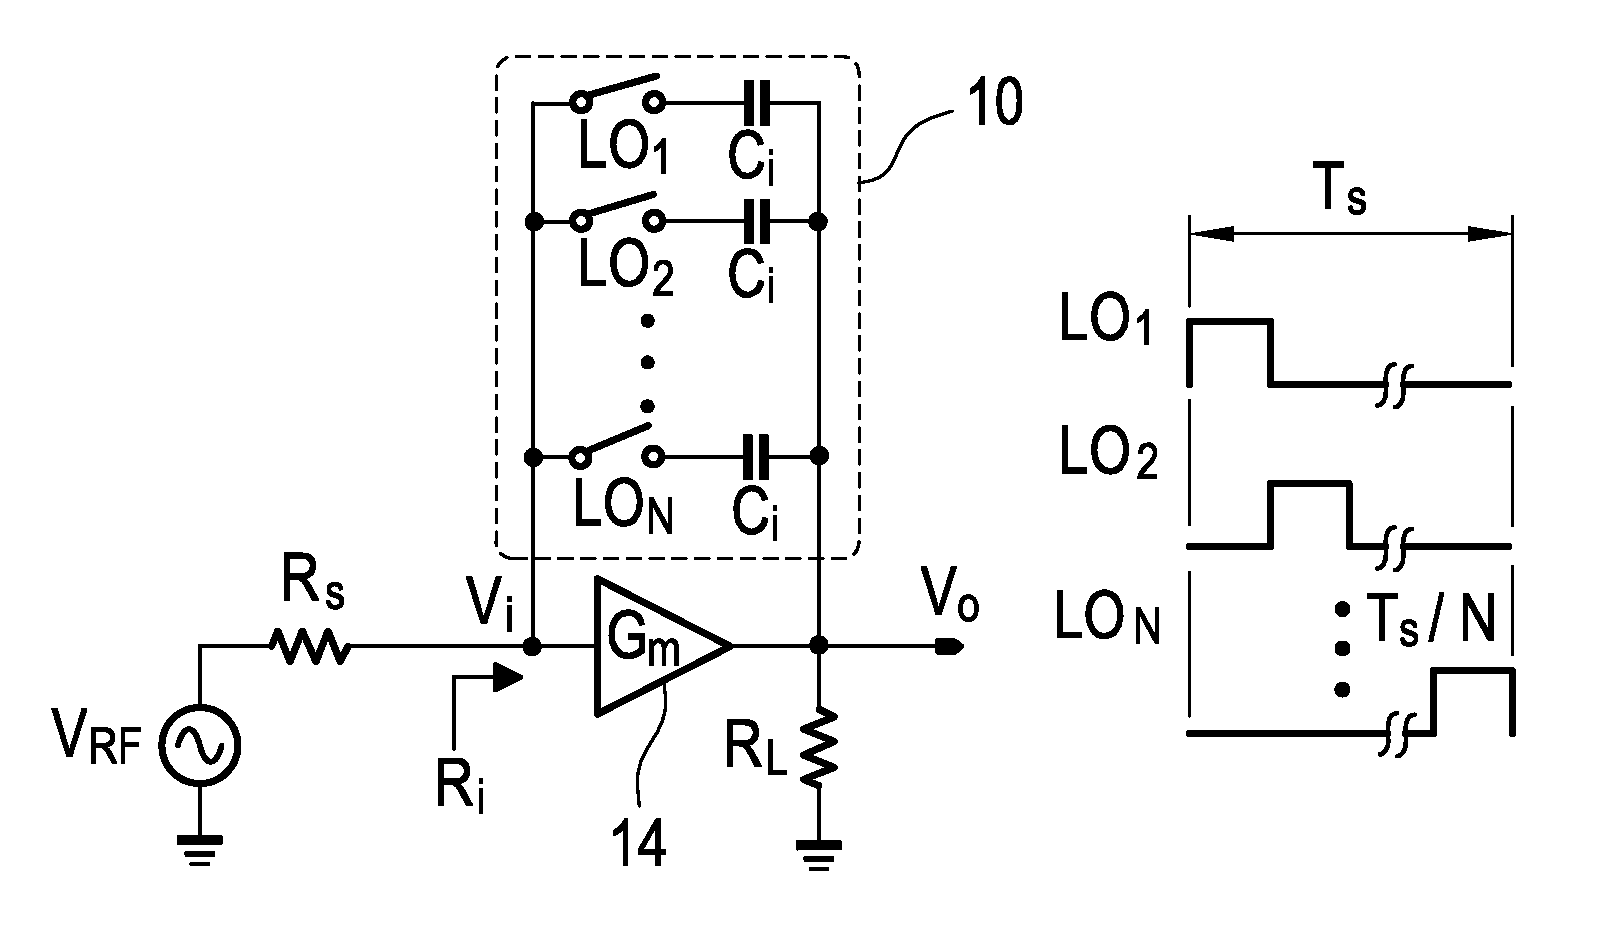 Gain-boosted N-path bandpass filter